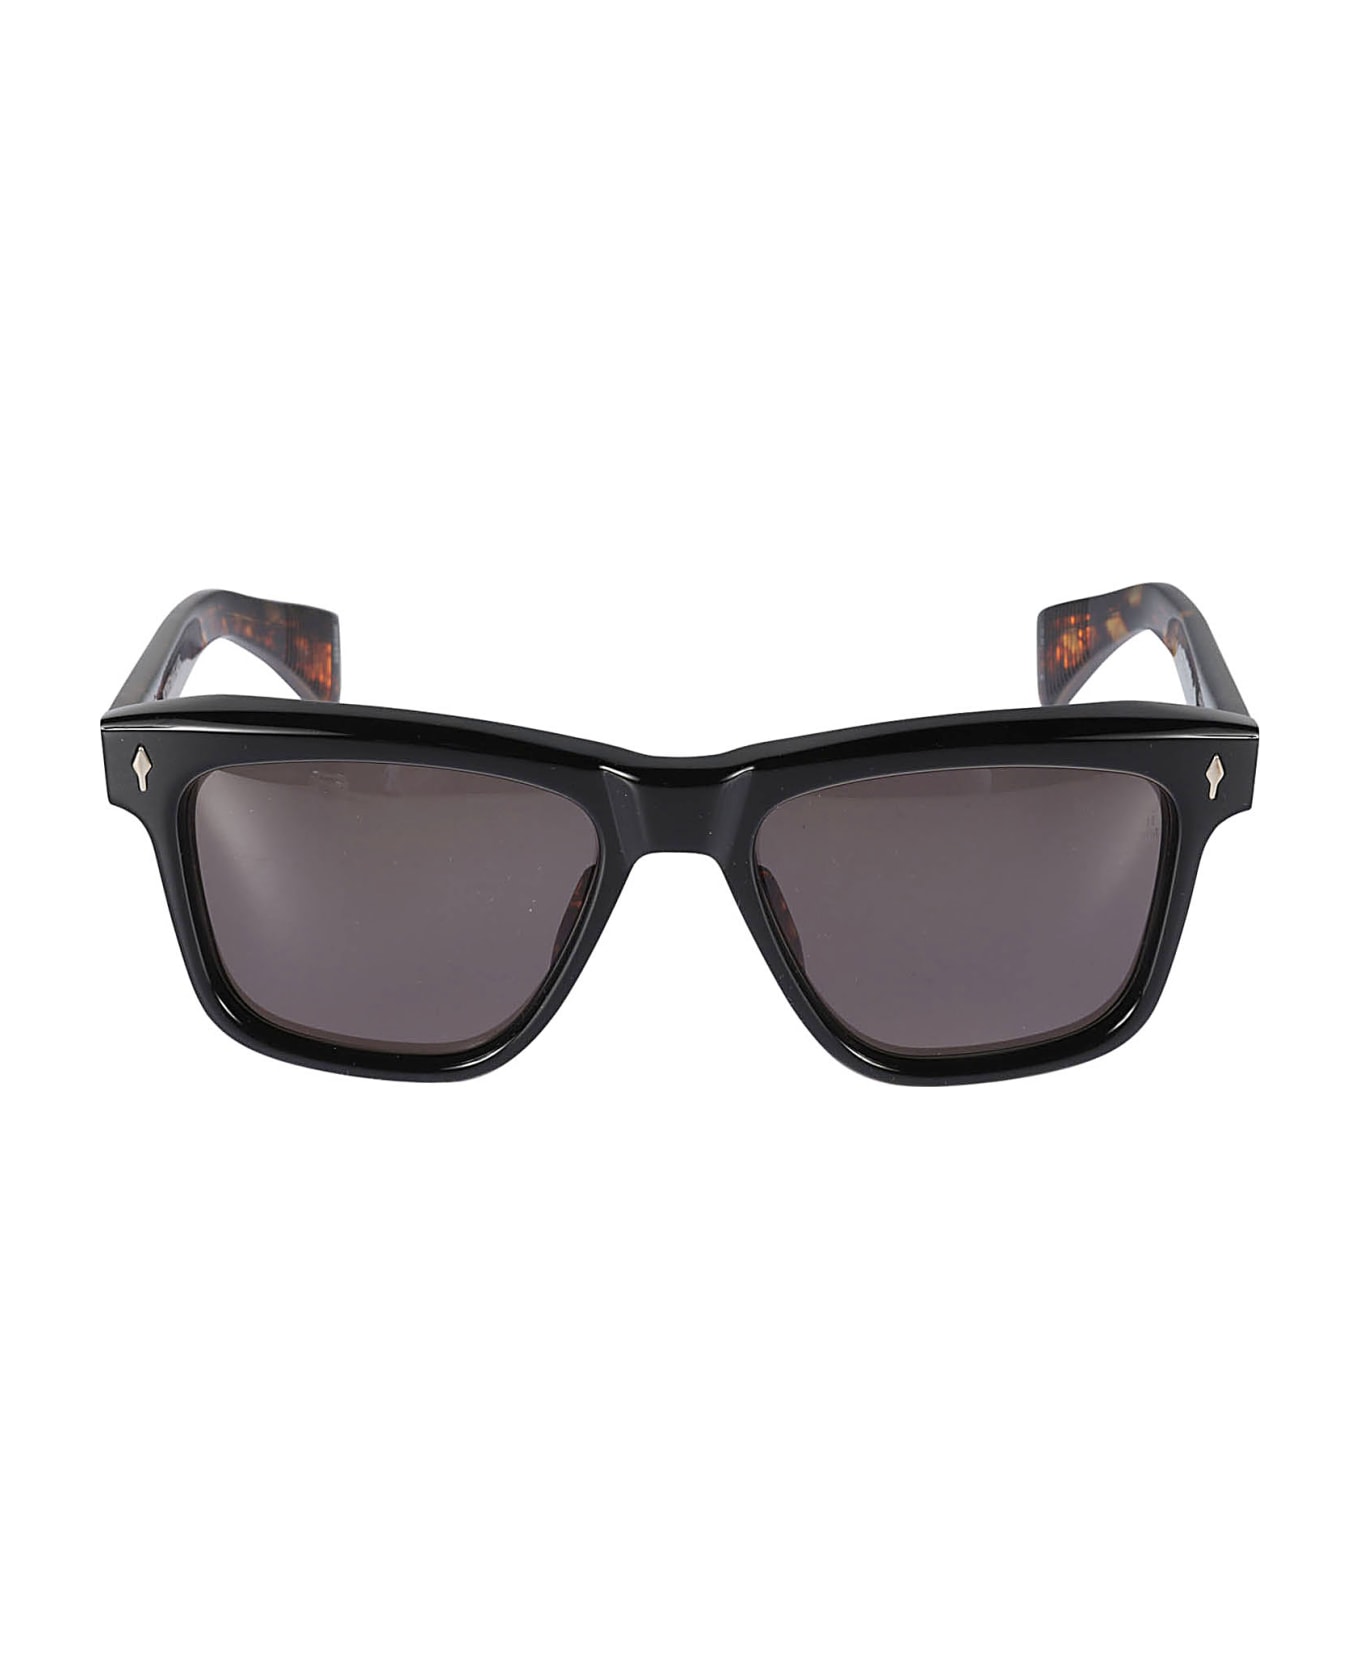 Jacques Marie Mage Lankaster Sunglasses edgy - Black